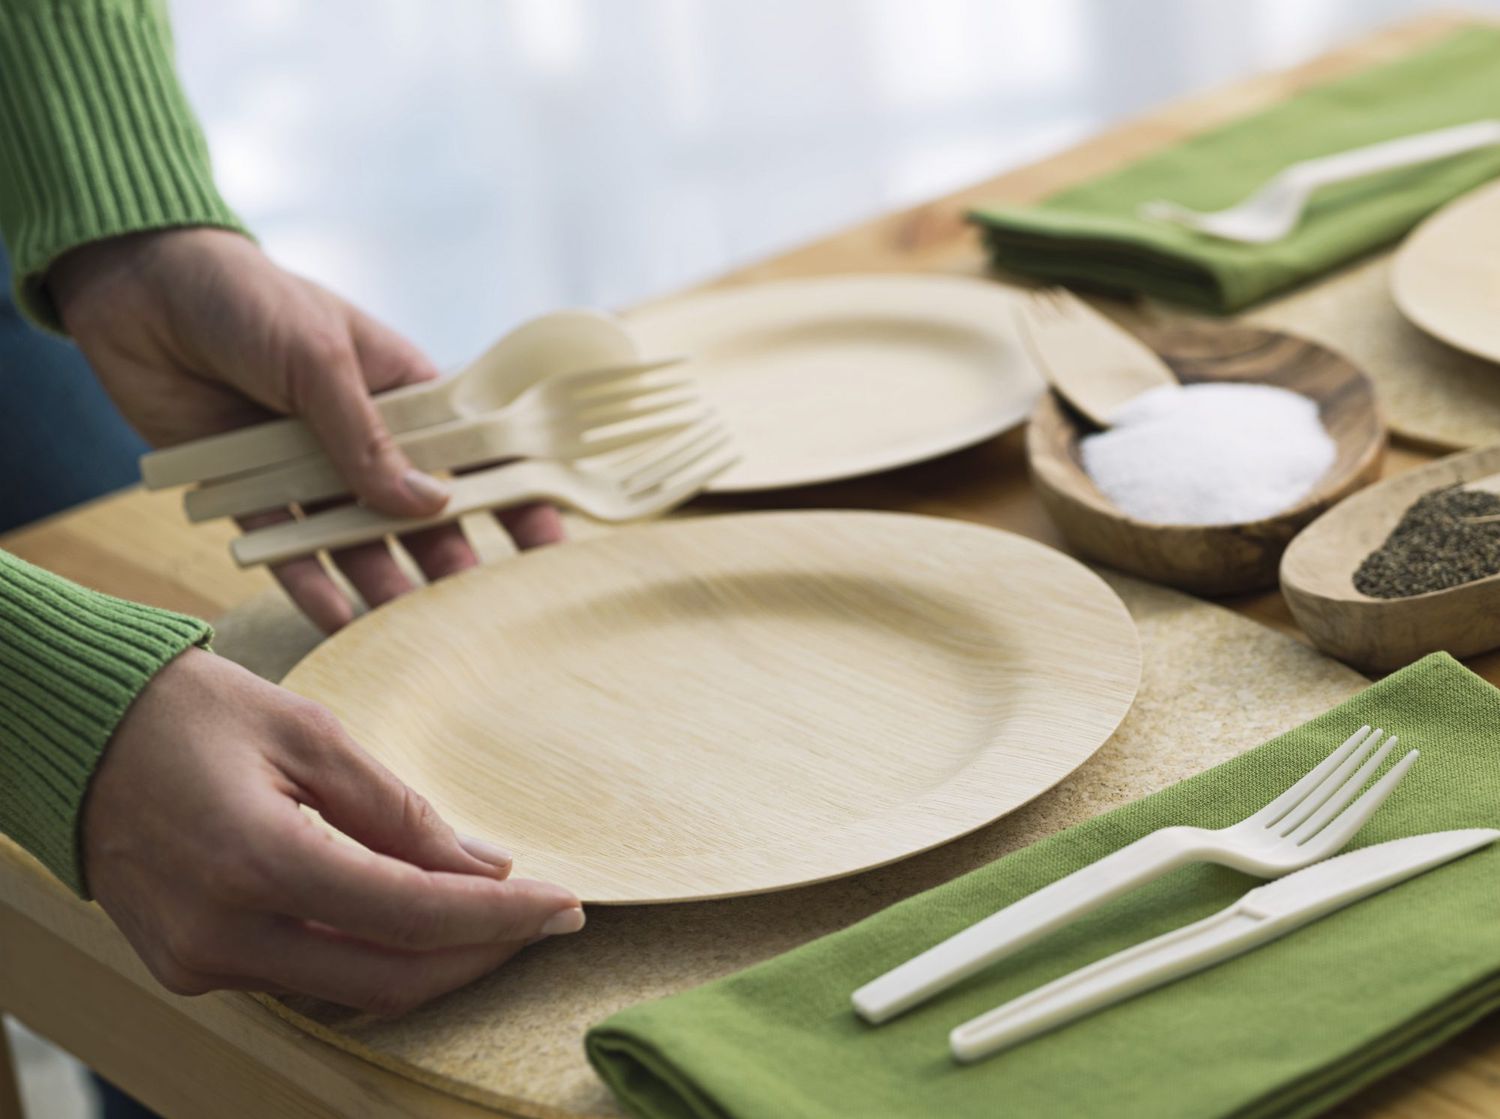 How To Describe Disposable Place Settings